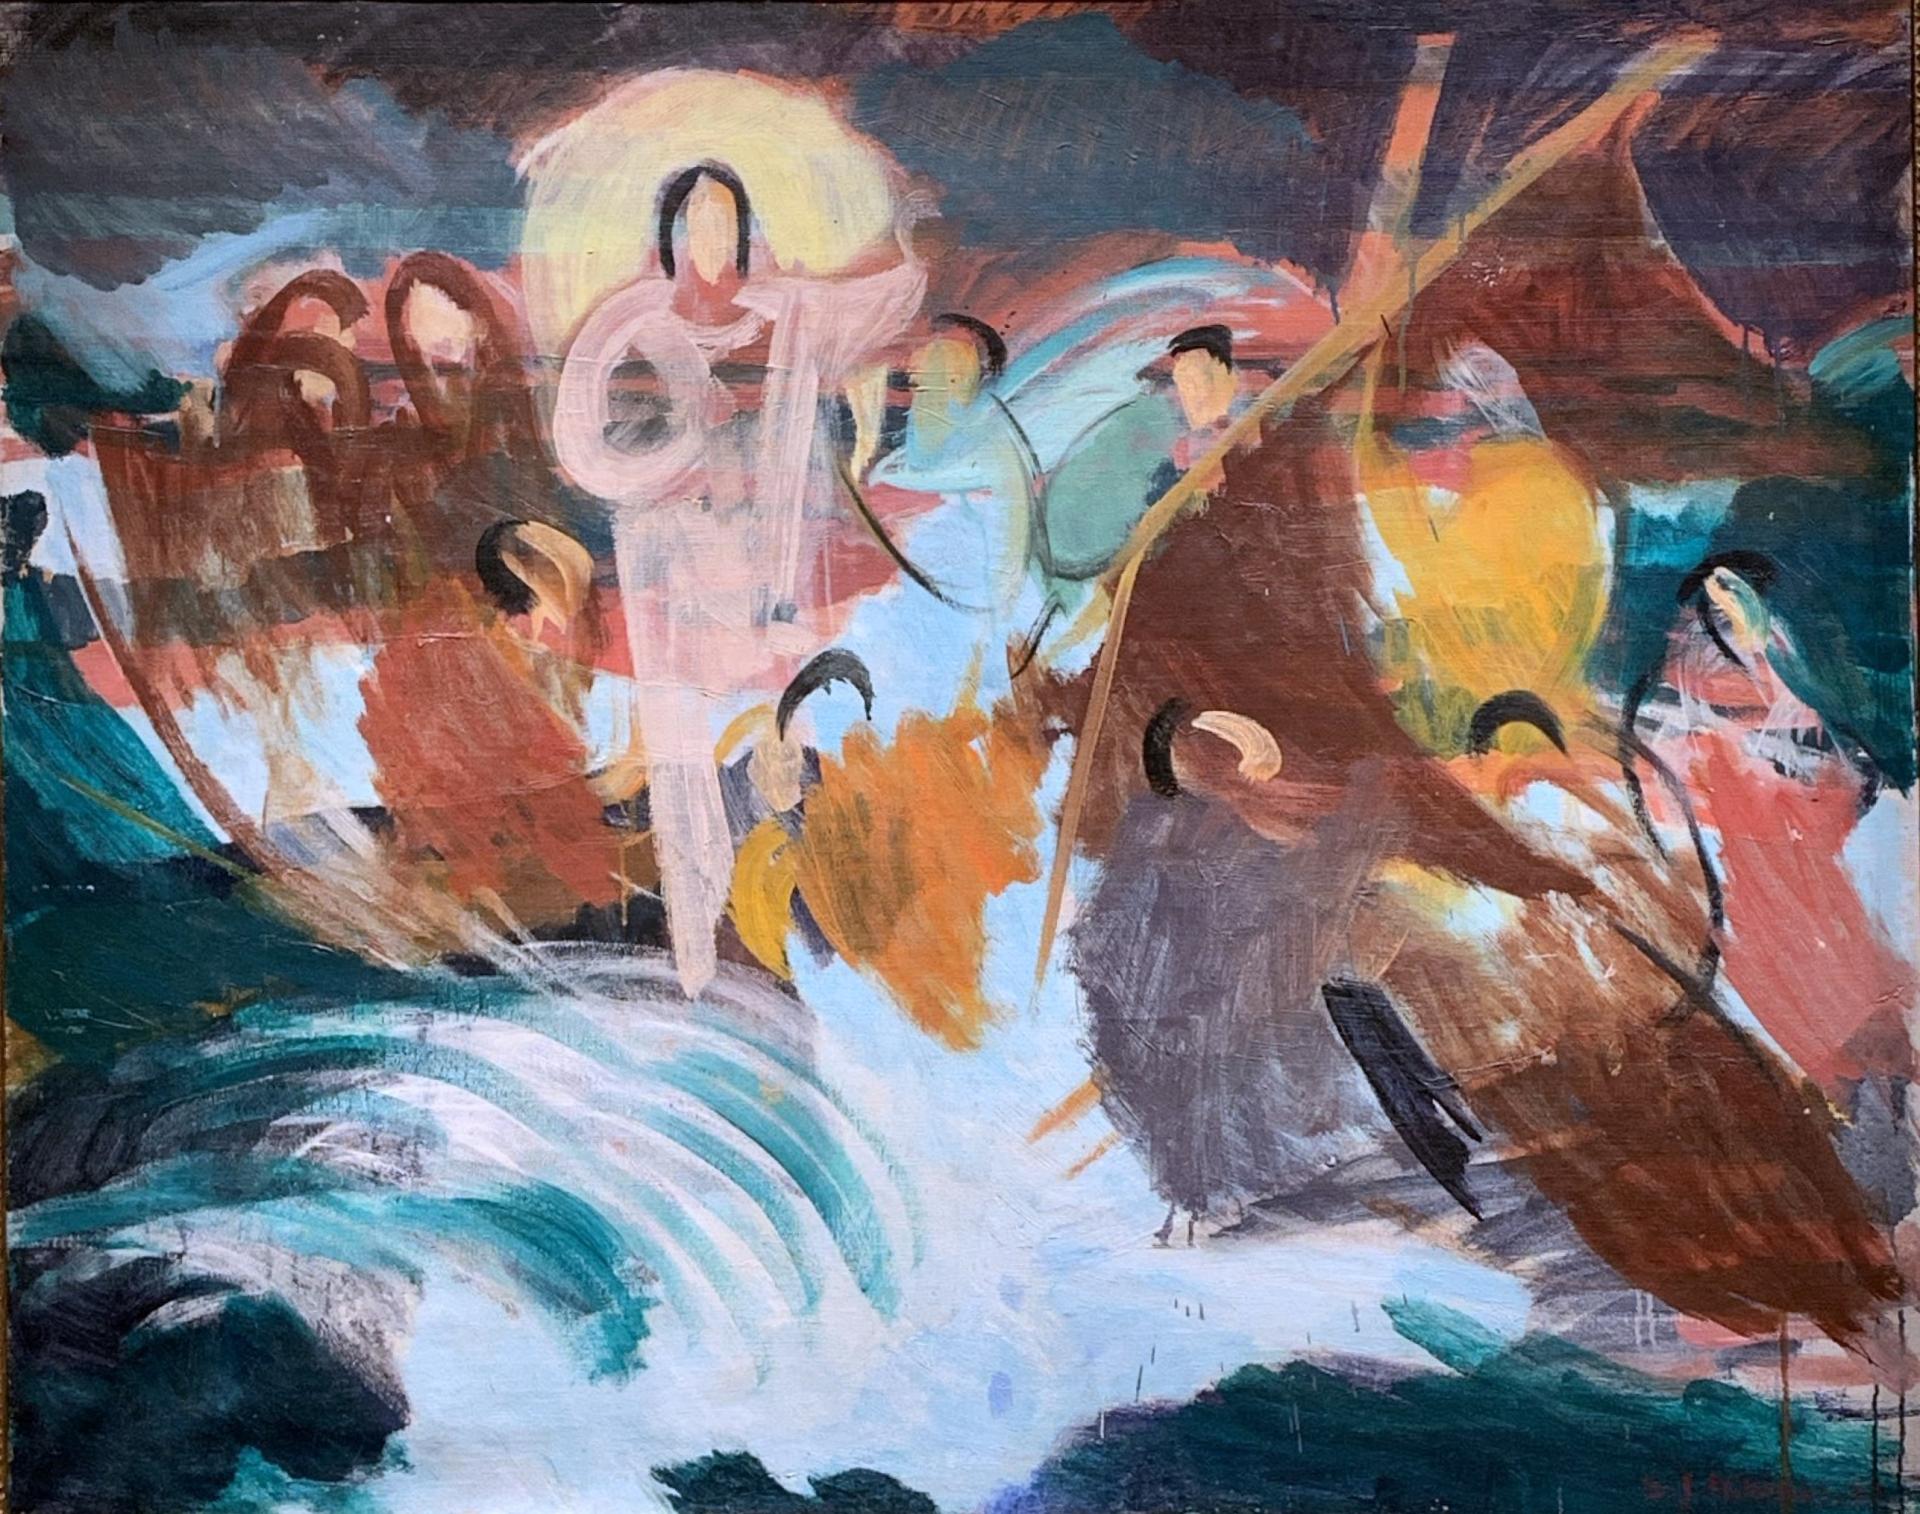 Jesus calms the storm
S.J. Mikines, 1950
Oil on canvas
Donated by the landowners´ association to the church of Mykines.